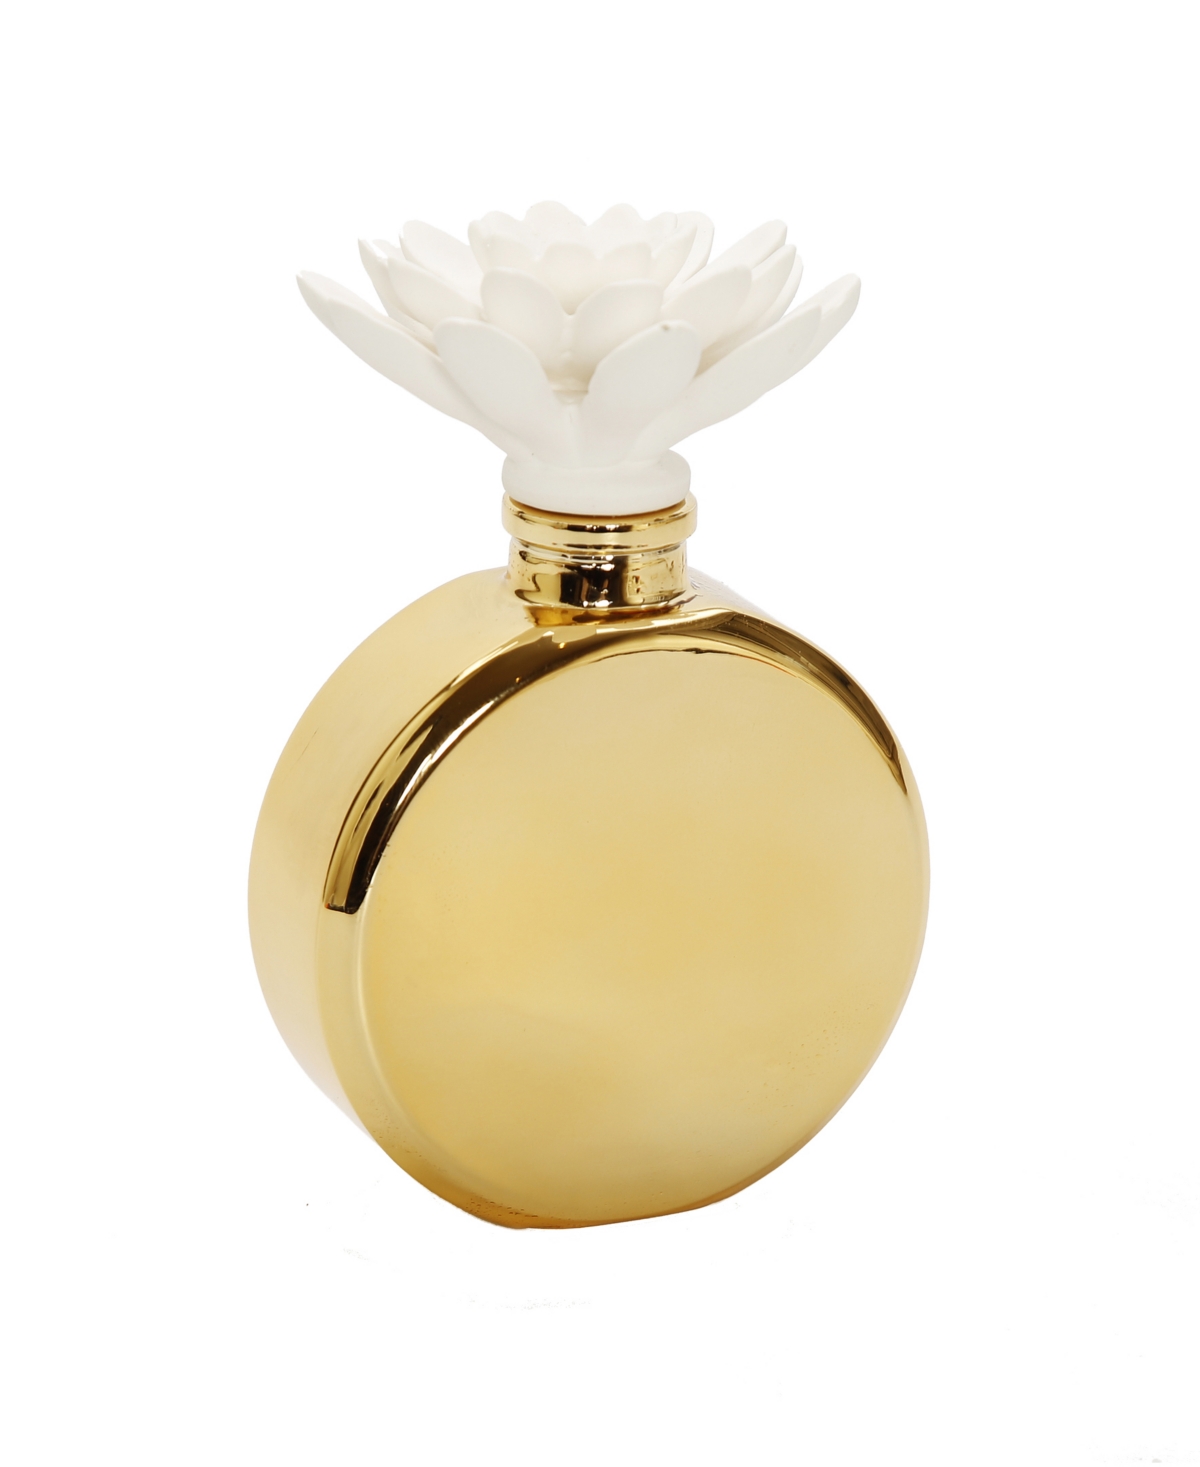 Iris Rose Bottle Diffuser with Flower - Gold-Tone